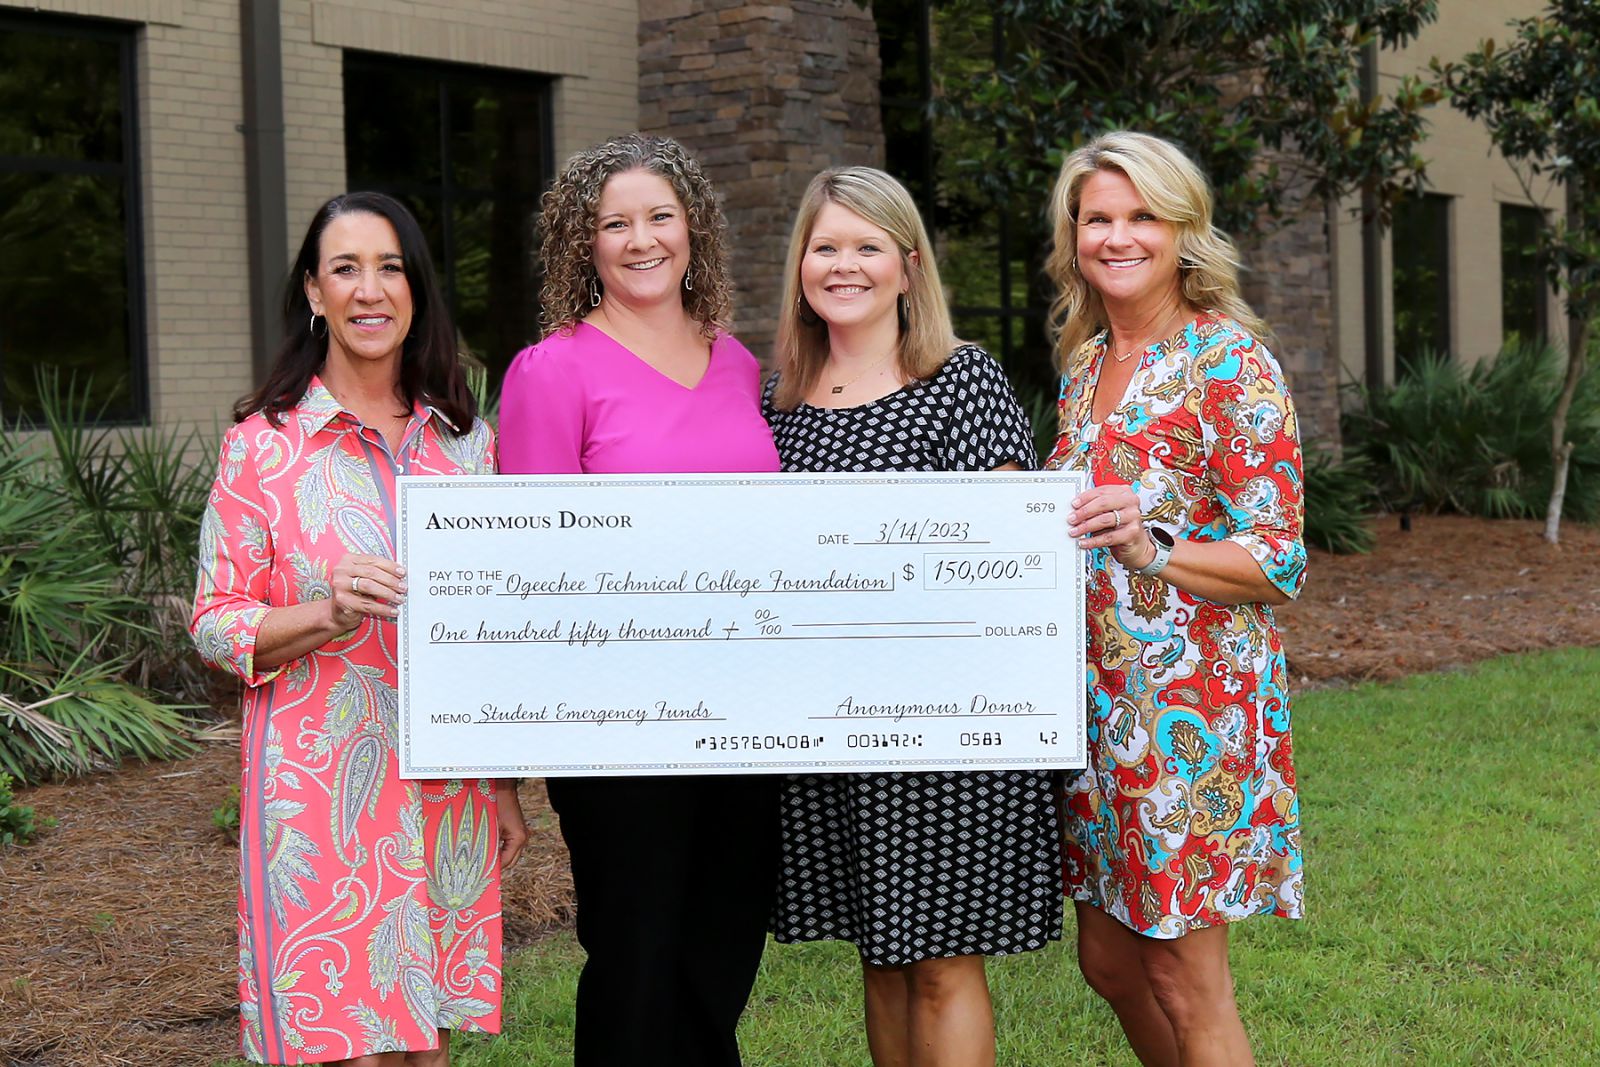 Michelle Davis, Christy Rikard, Christina Harrell, and President Lori Durden with anonymous check donation.